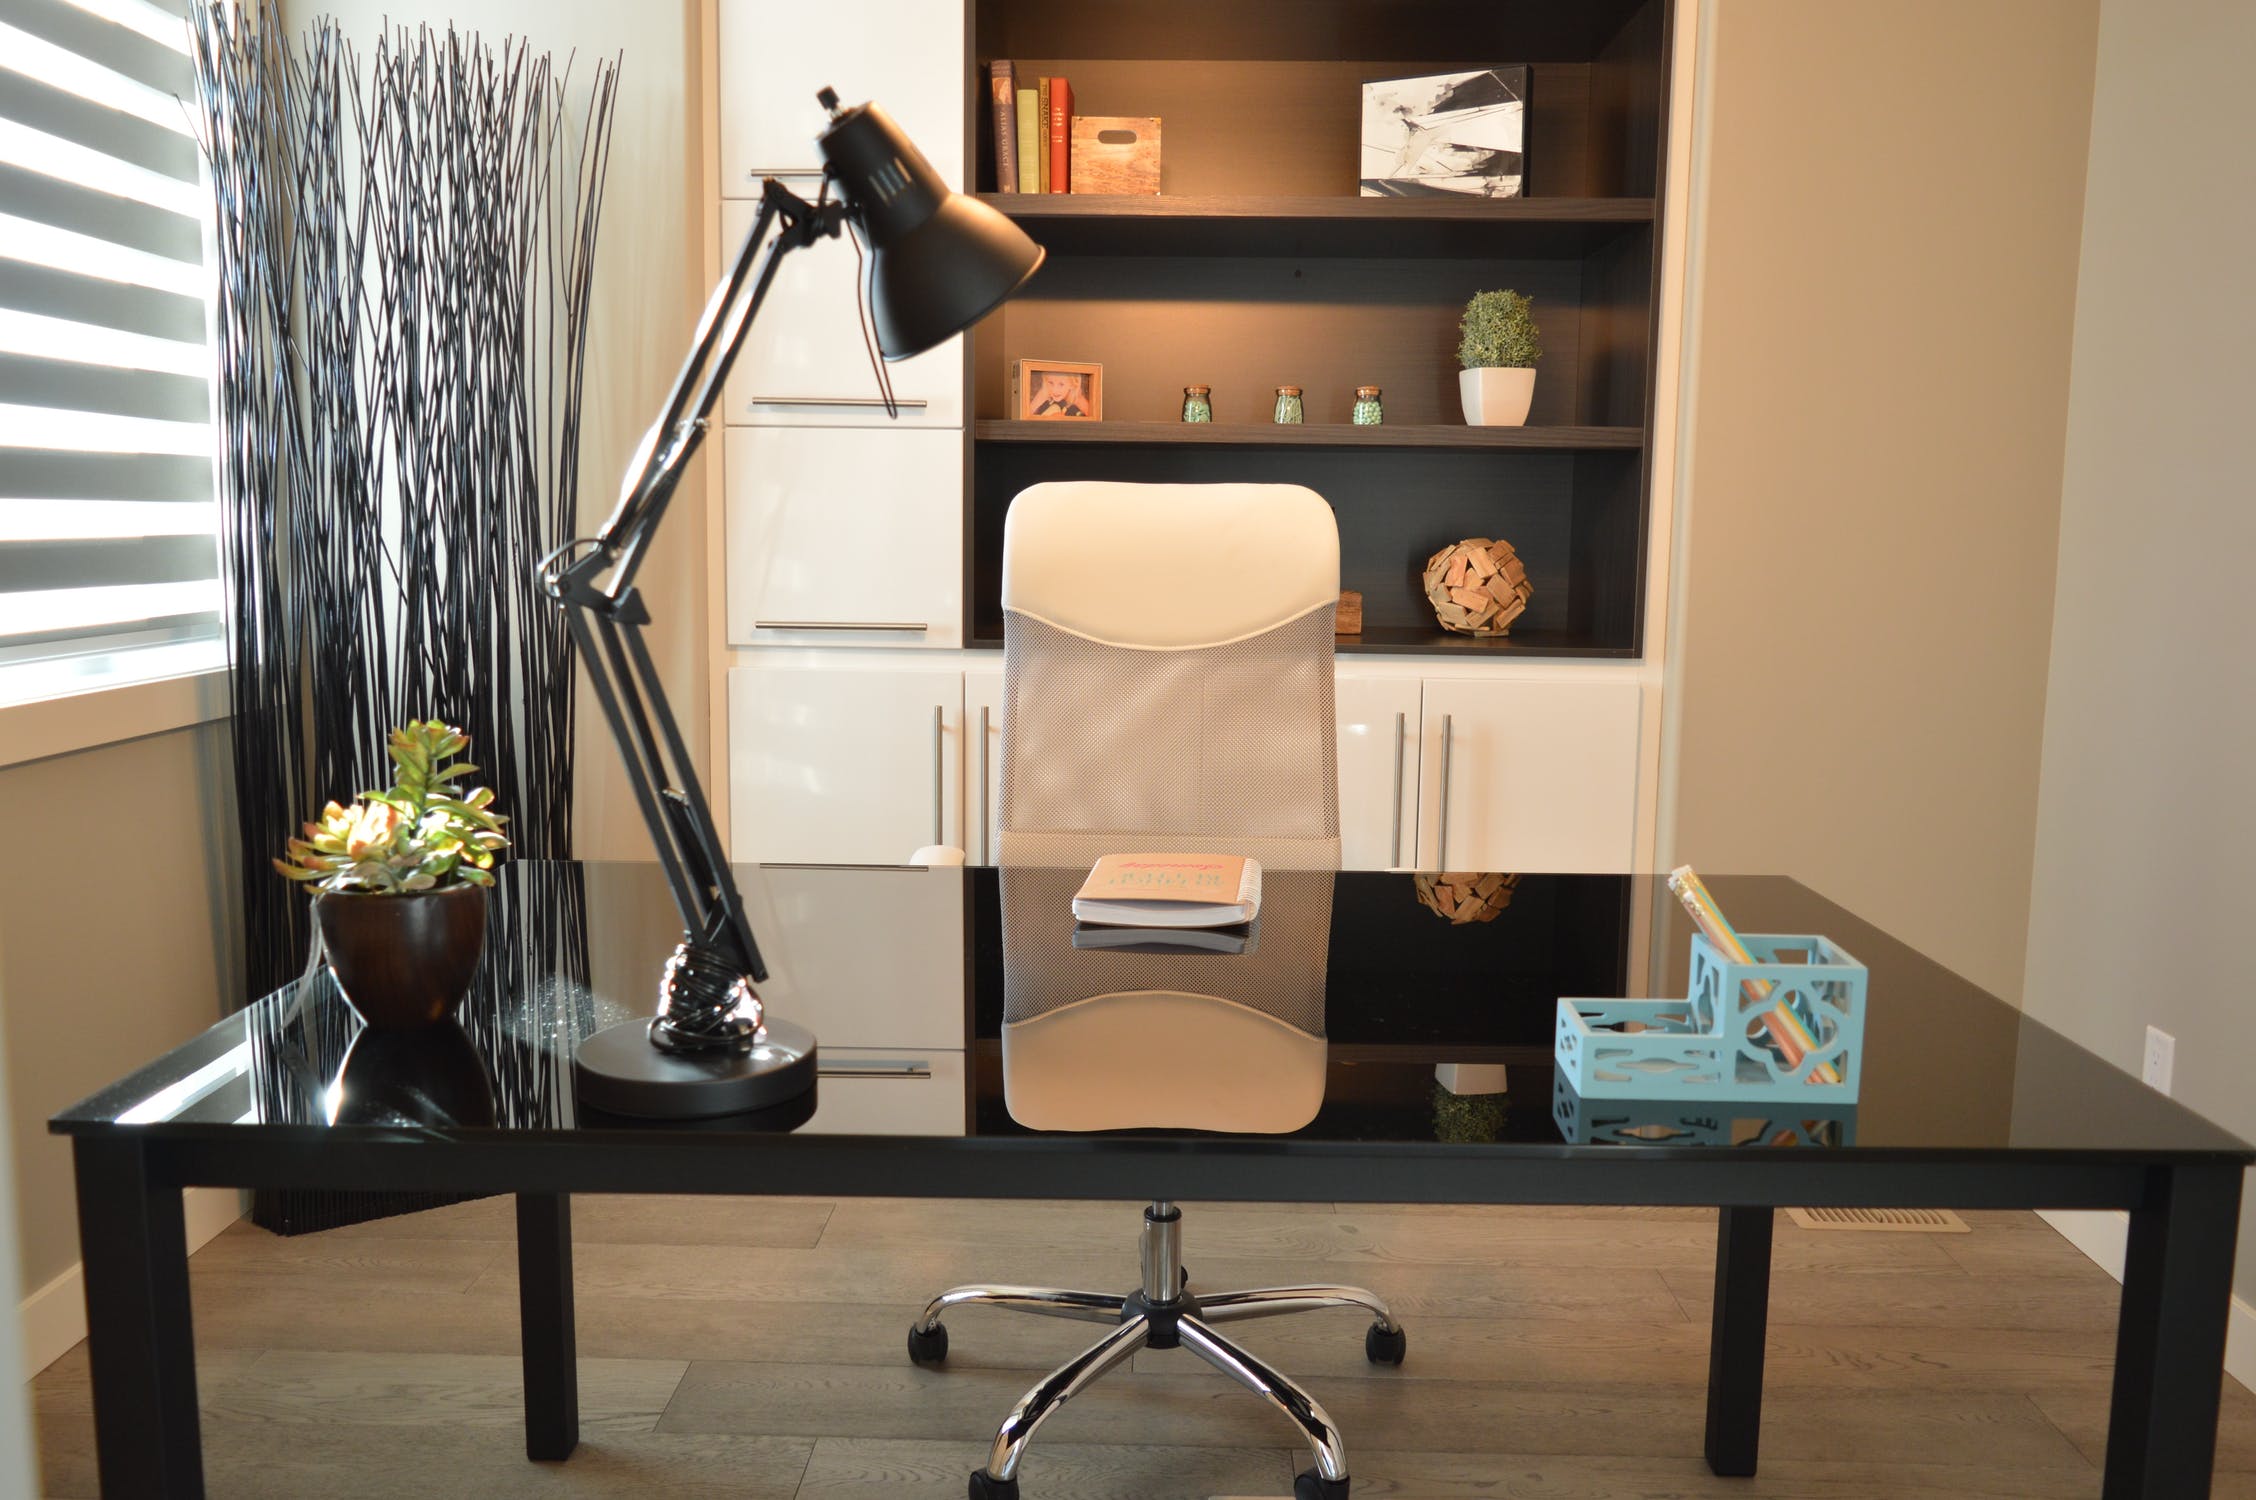 4 Items You Must Have in Your Home Office